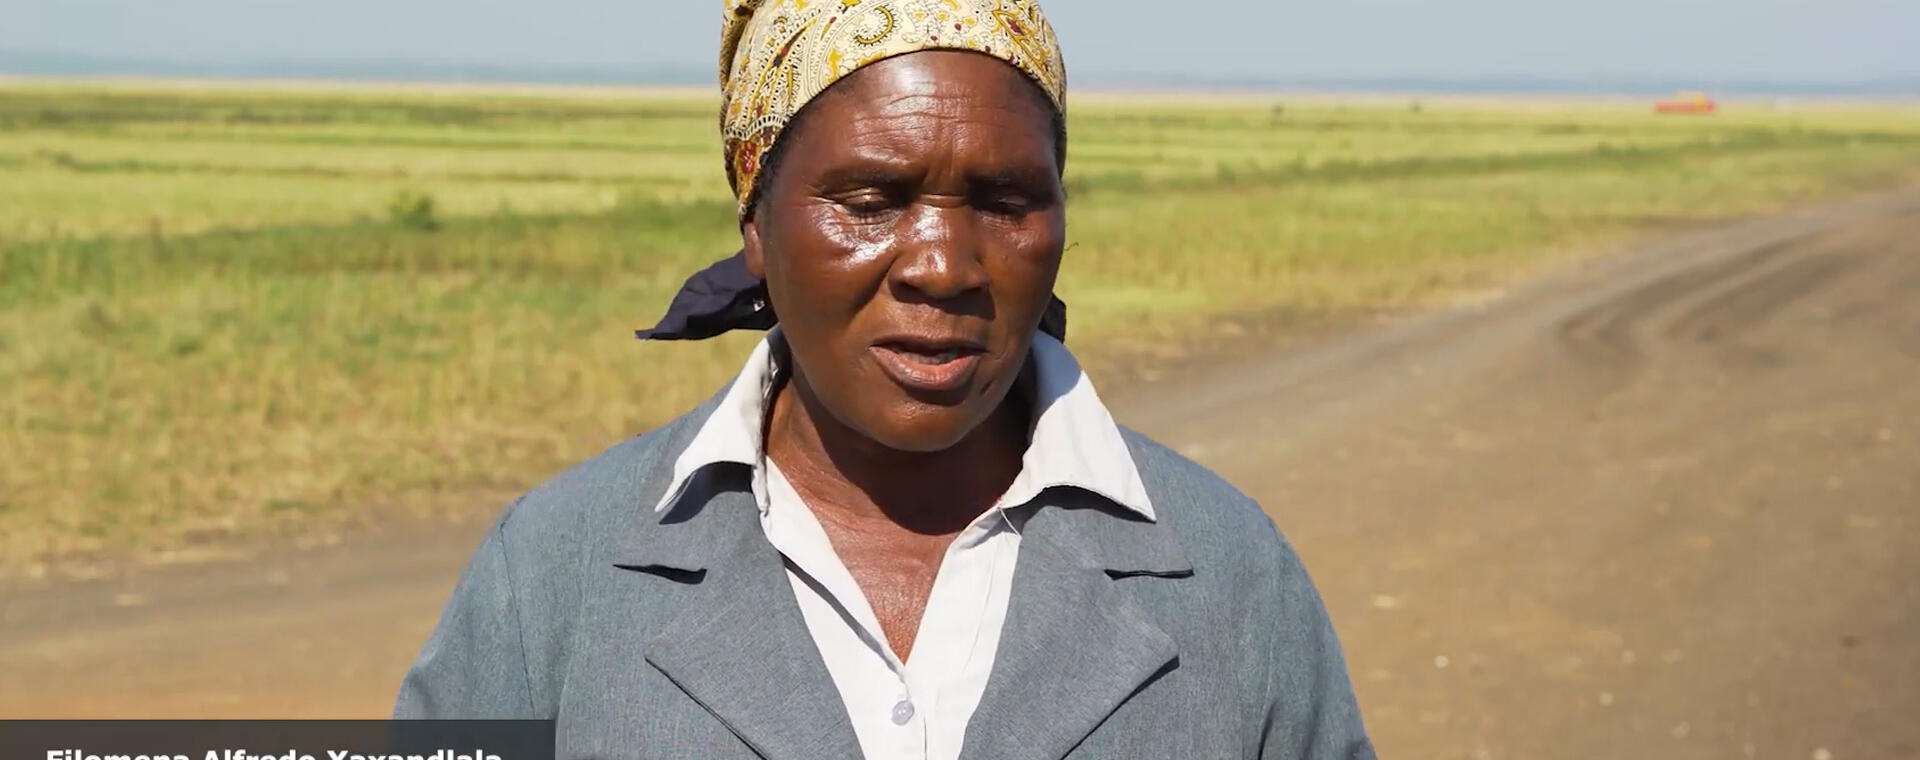 Mozambique- Sowing the Seeds of Resilience